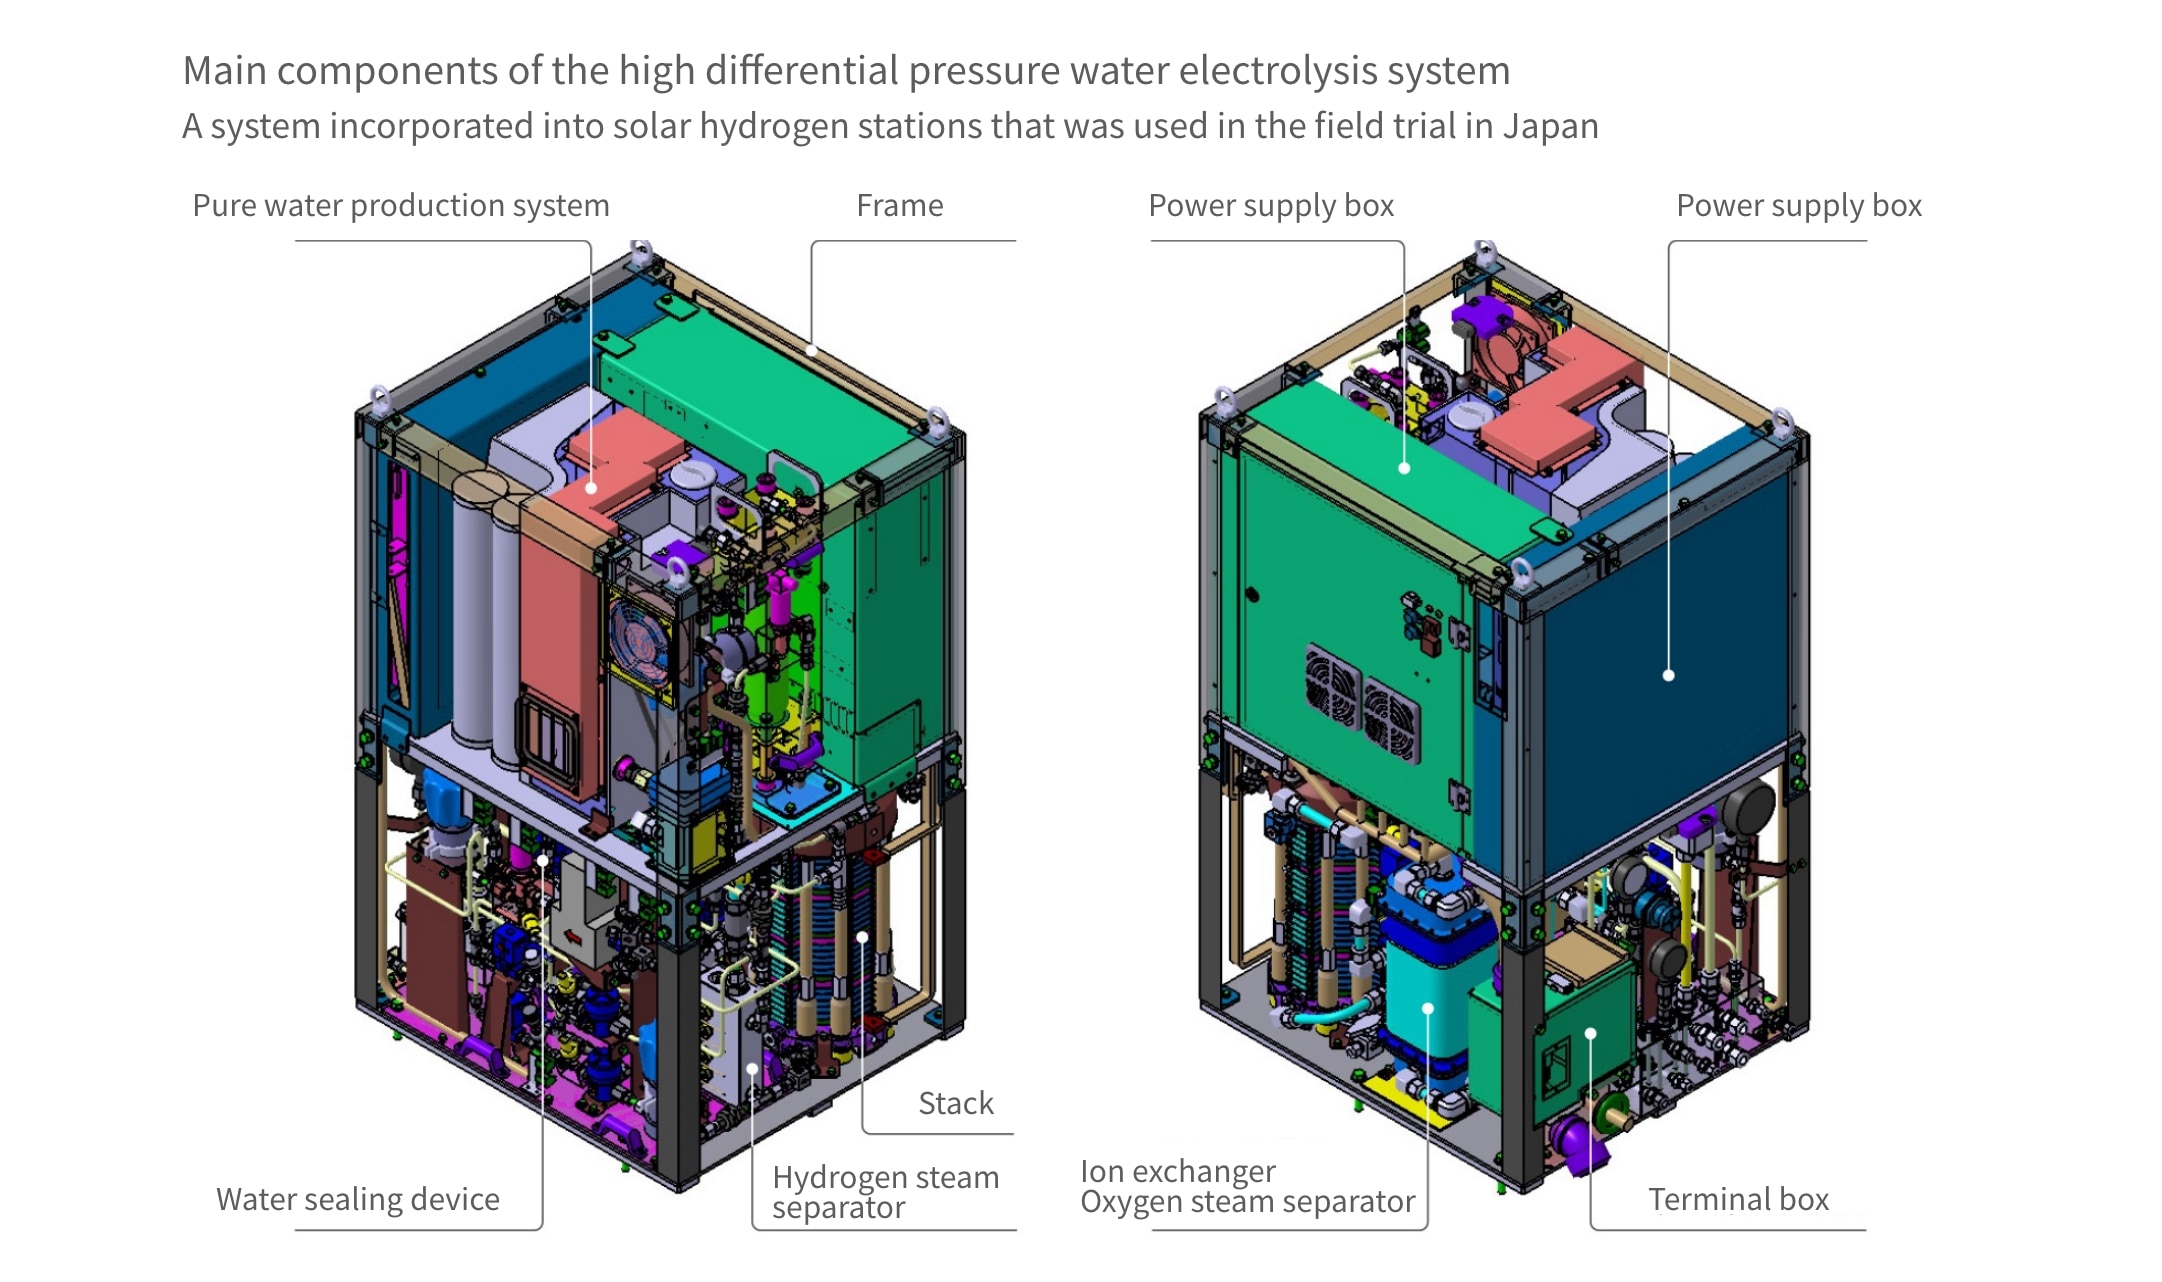 The main components of the high differential pressure water electrolysis system incorporating a high differential pressure water electrolysis stack. The system is very simple and compact.